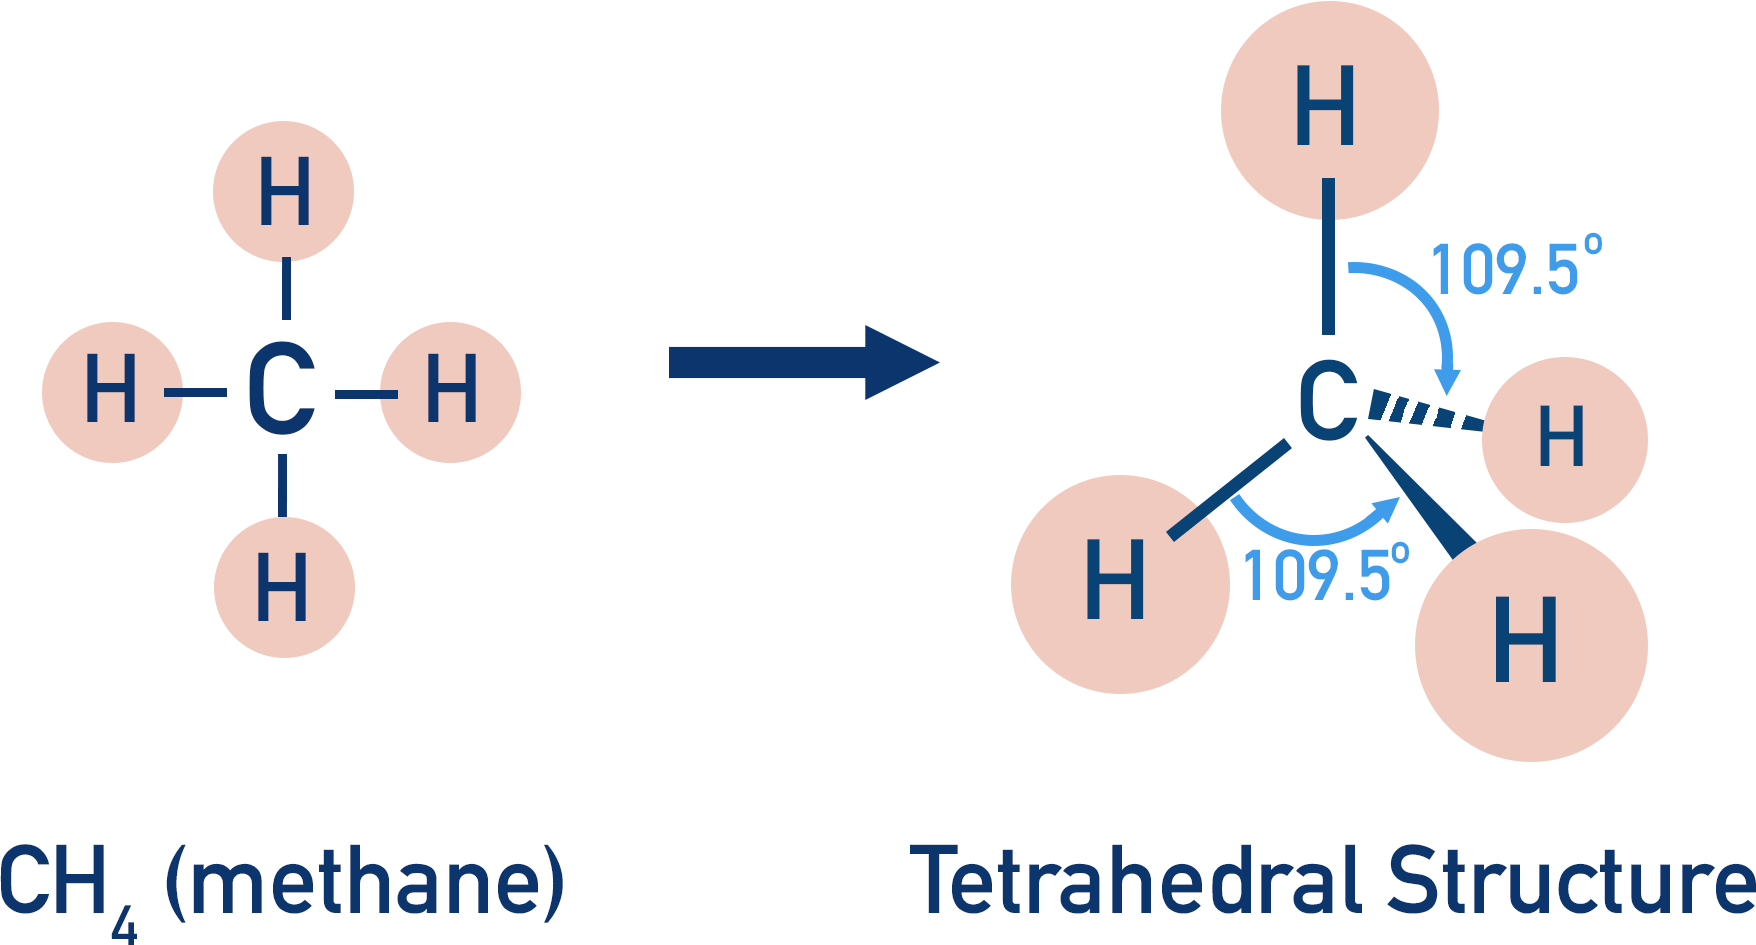 structure of methane tetrahedral bond angle 109.5